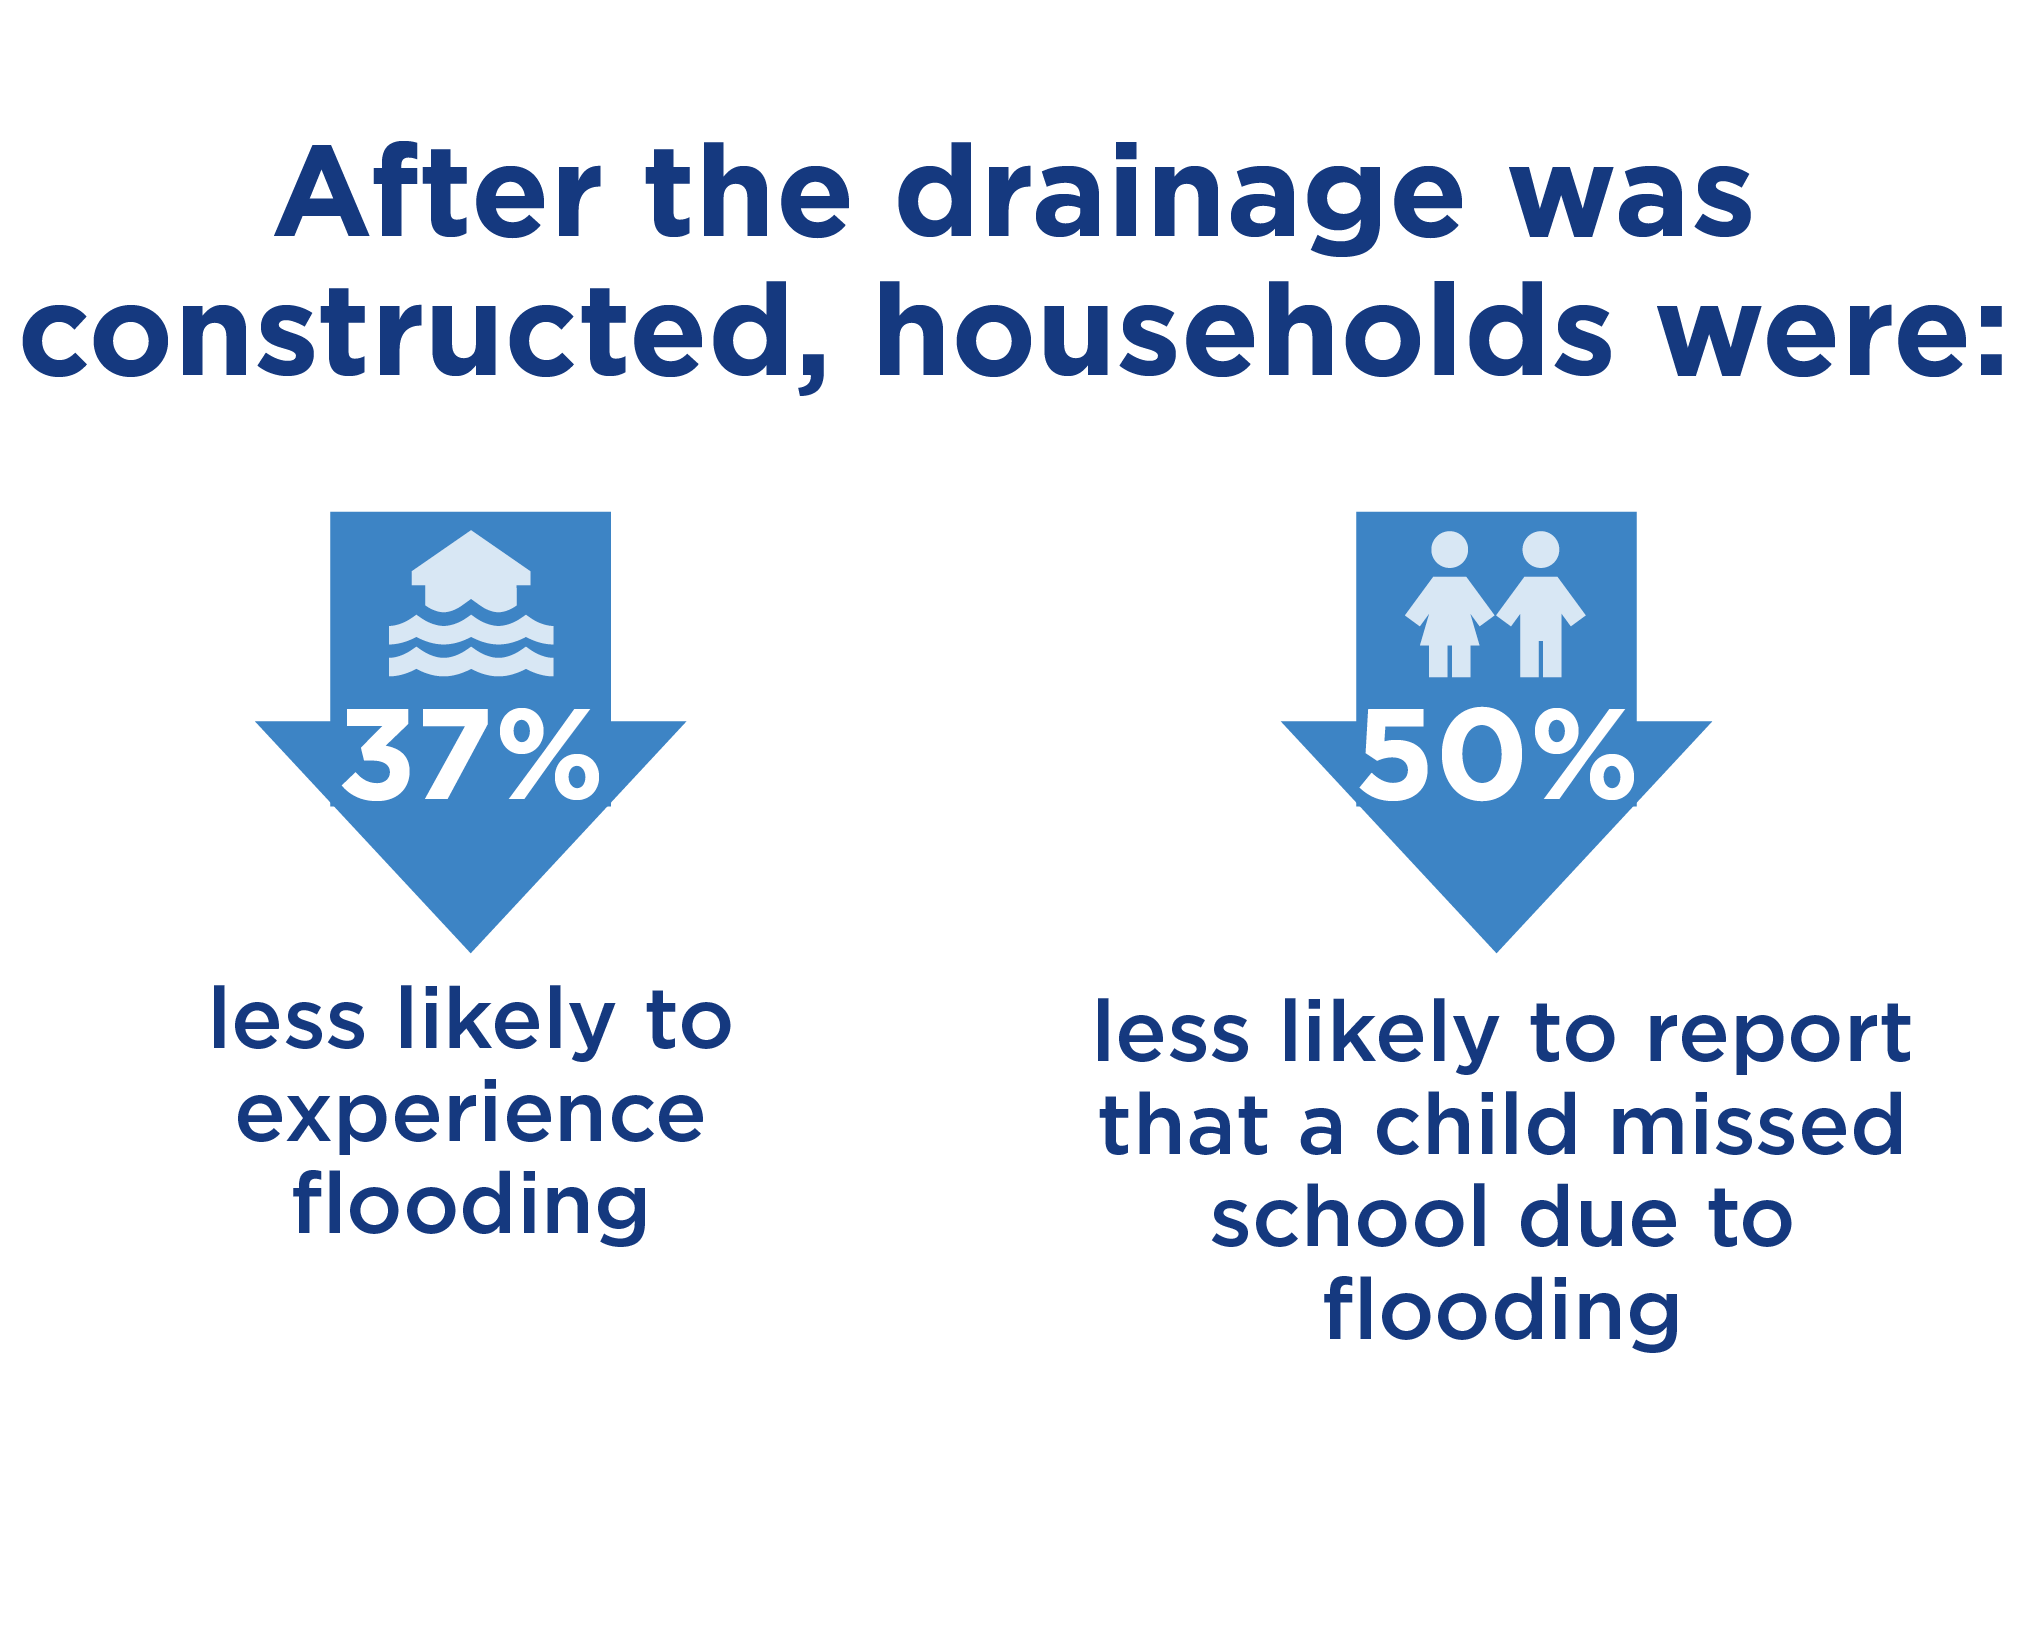 After the drainage was constructed, households were 37% less likely to experience flooding, and 50% less likely to report that a child missed school due to flooding.